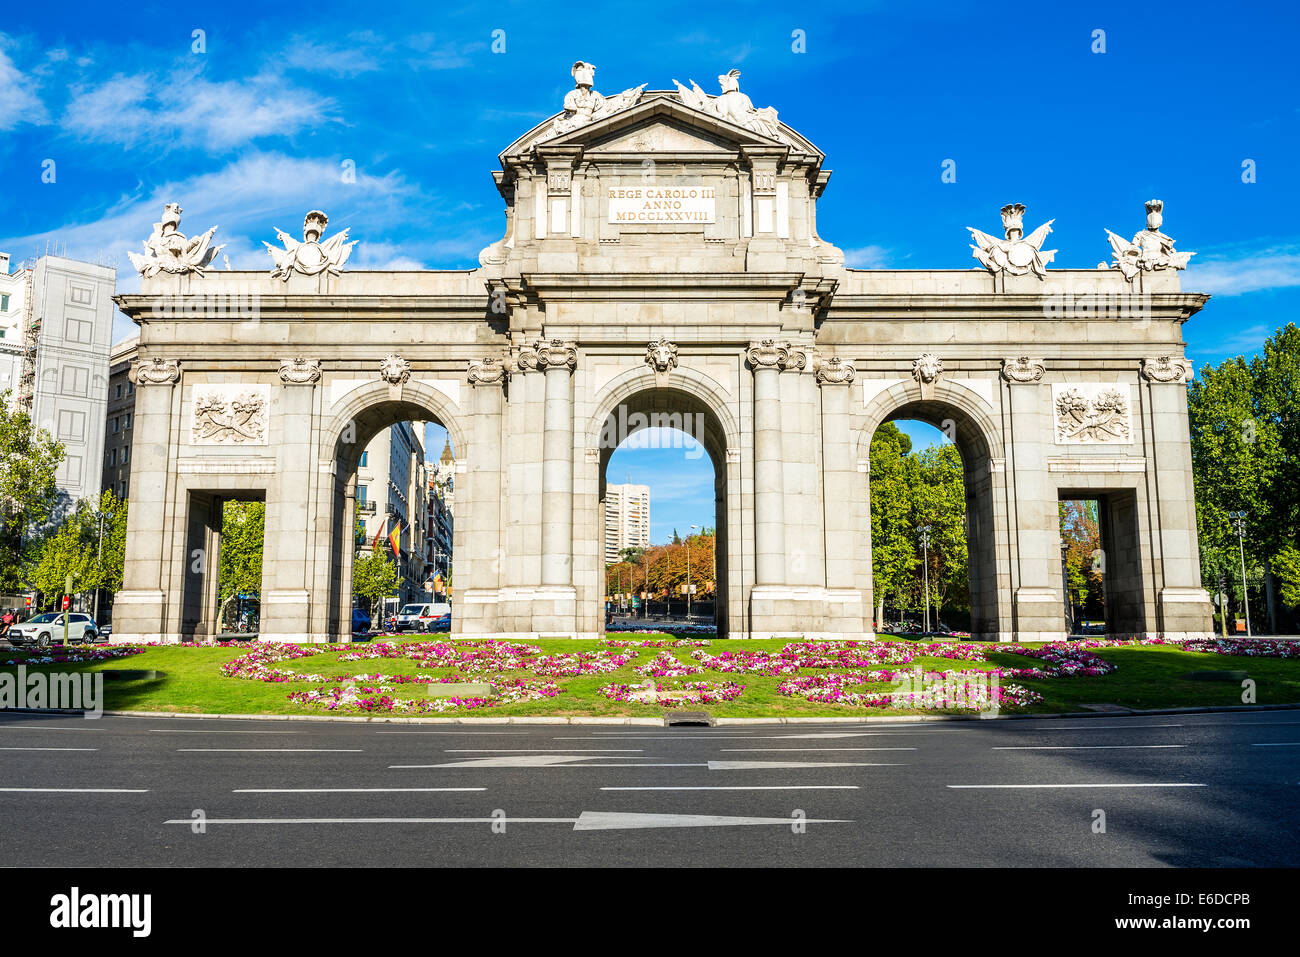 The Puerta de Alcala is a monument in the Plaza de la Independencia ('Independence Square') in Madrid, Spain. It was commissione Stock Photo